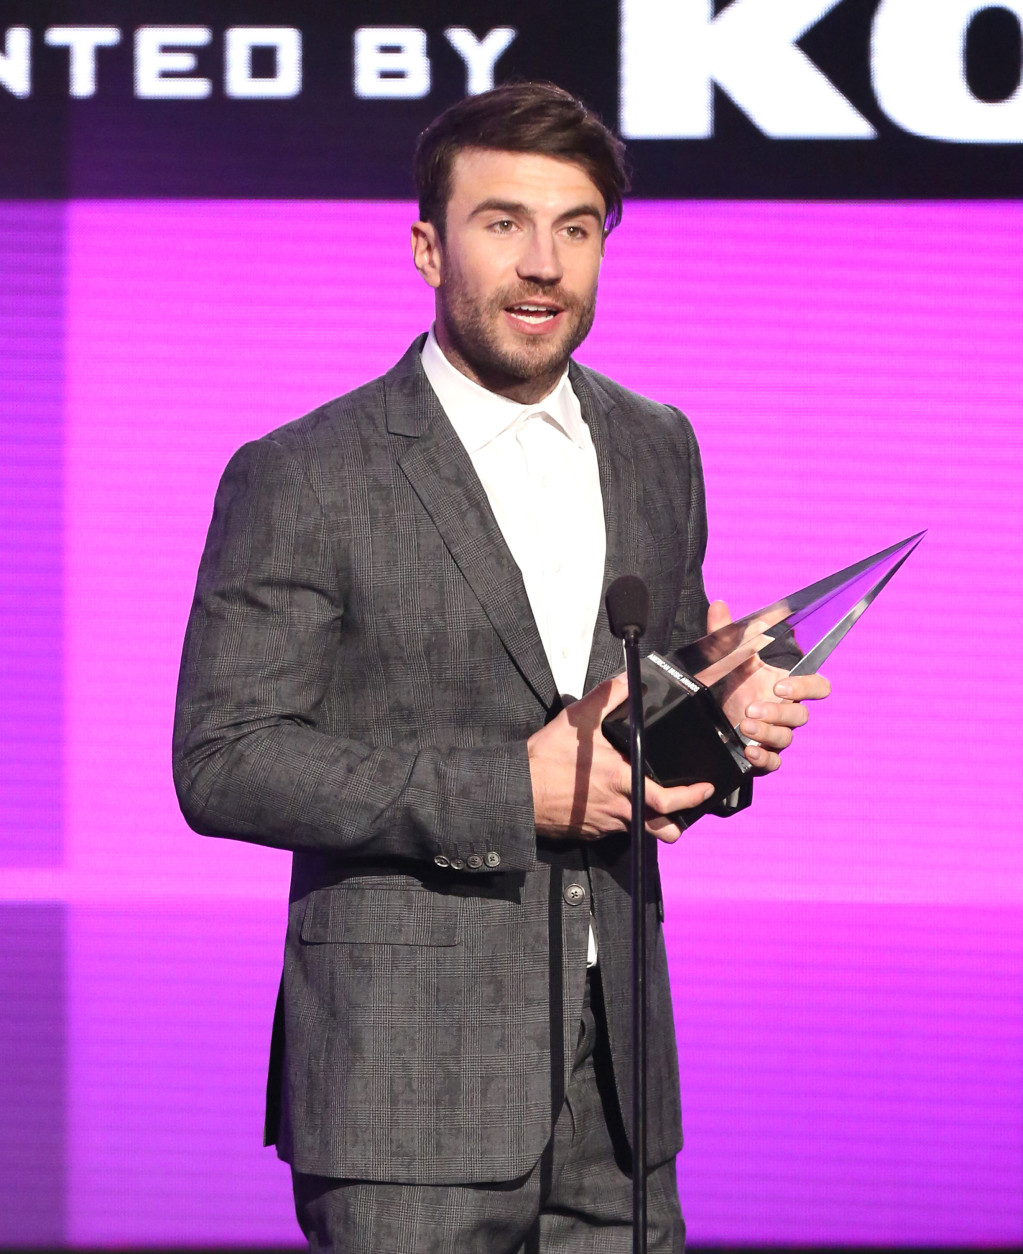 Sam Hunt accepts the award for new artist of the year at the American Music Awards at the Microsoft Theater on Sunday, Nov. 22, 2015, in Los Angeles. (Photo by Matt Sayles/Invision/AP)